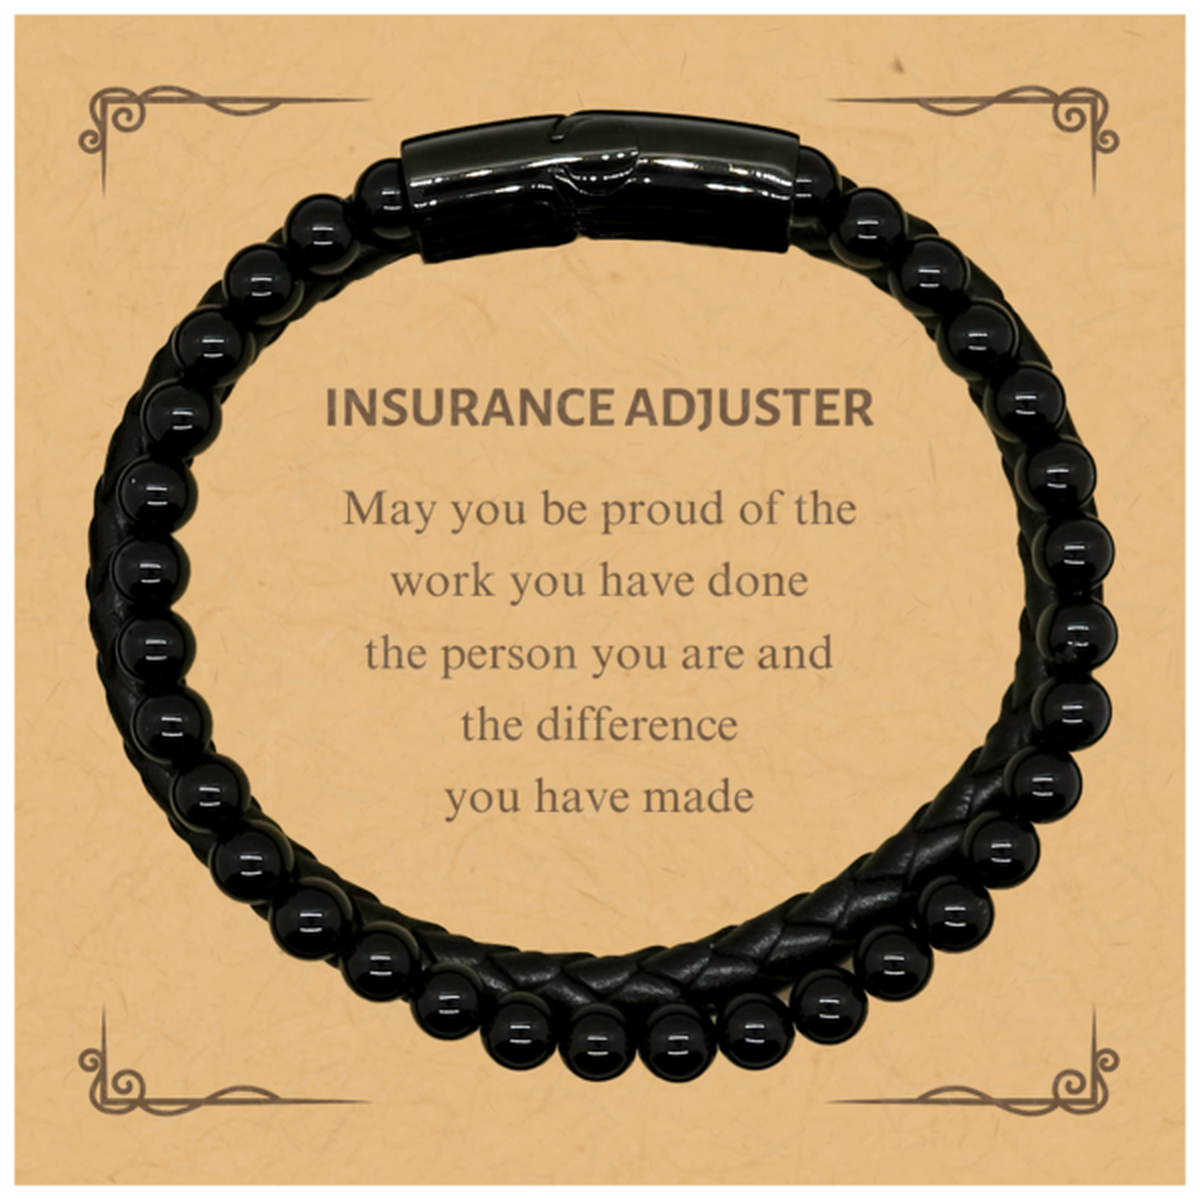 Insurance Adjuster May you be proud of the work you have done, Retirement Insurance Adjuster Stone Leather Bracelets for Colleague Appreciation Gifts Amazing for Insurance Adjuster